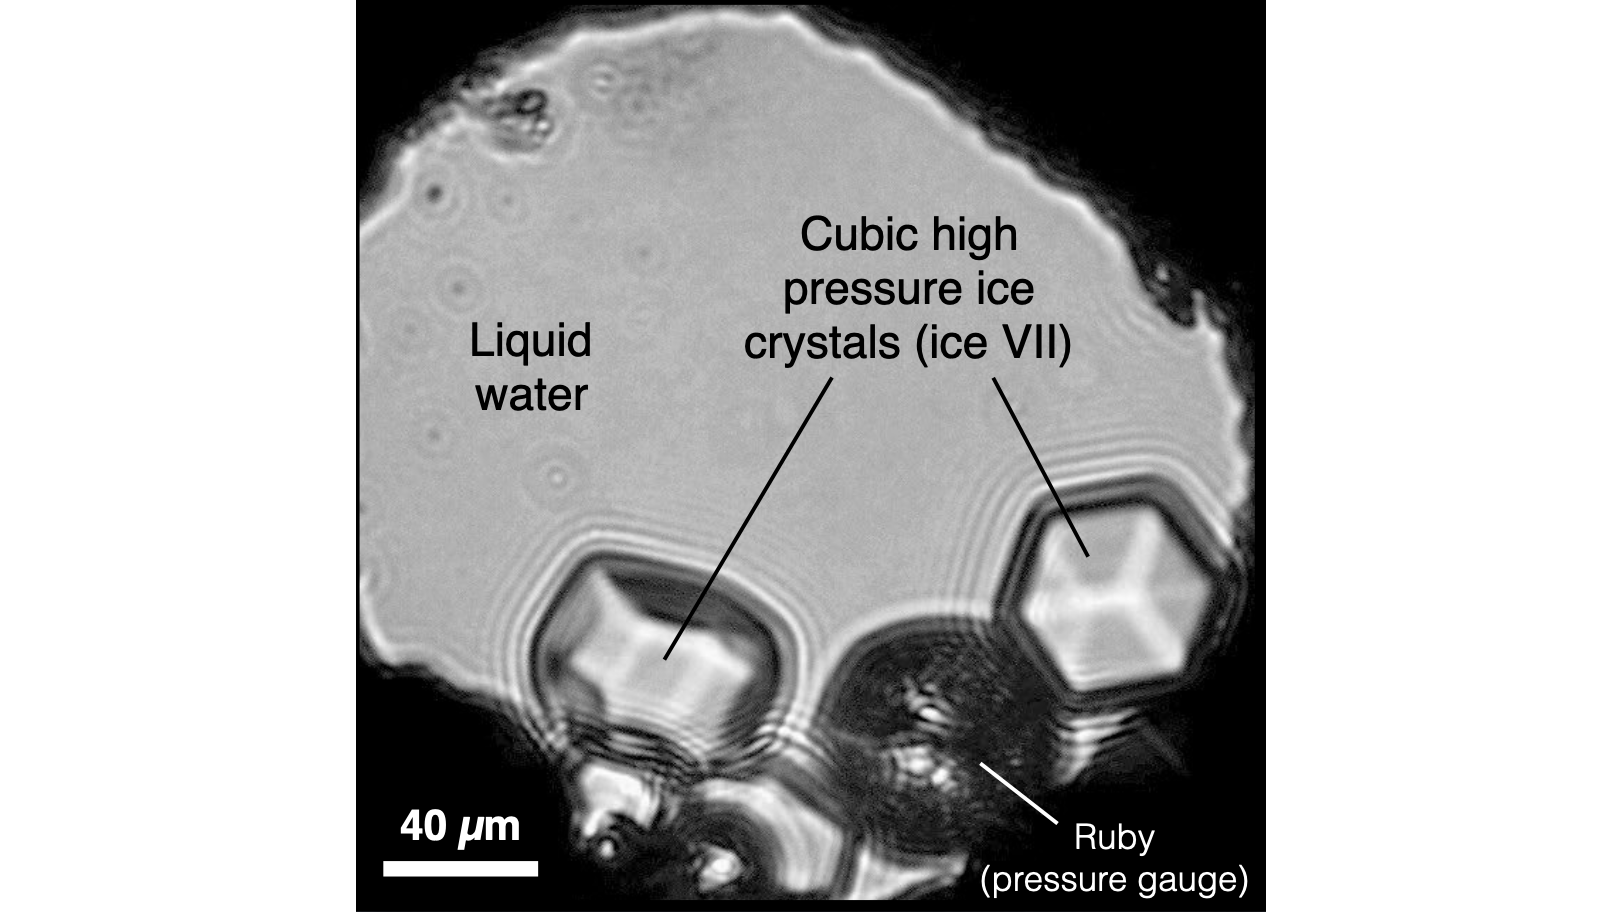 A microphotograph showing cubic crystals of ice VII growing in liquid water at a pressure of 30,000 atmospheres and a temperature of 266 degrees Fahrenheit (130 degrees Celsius).